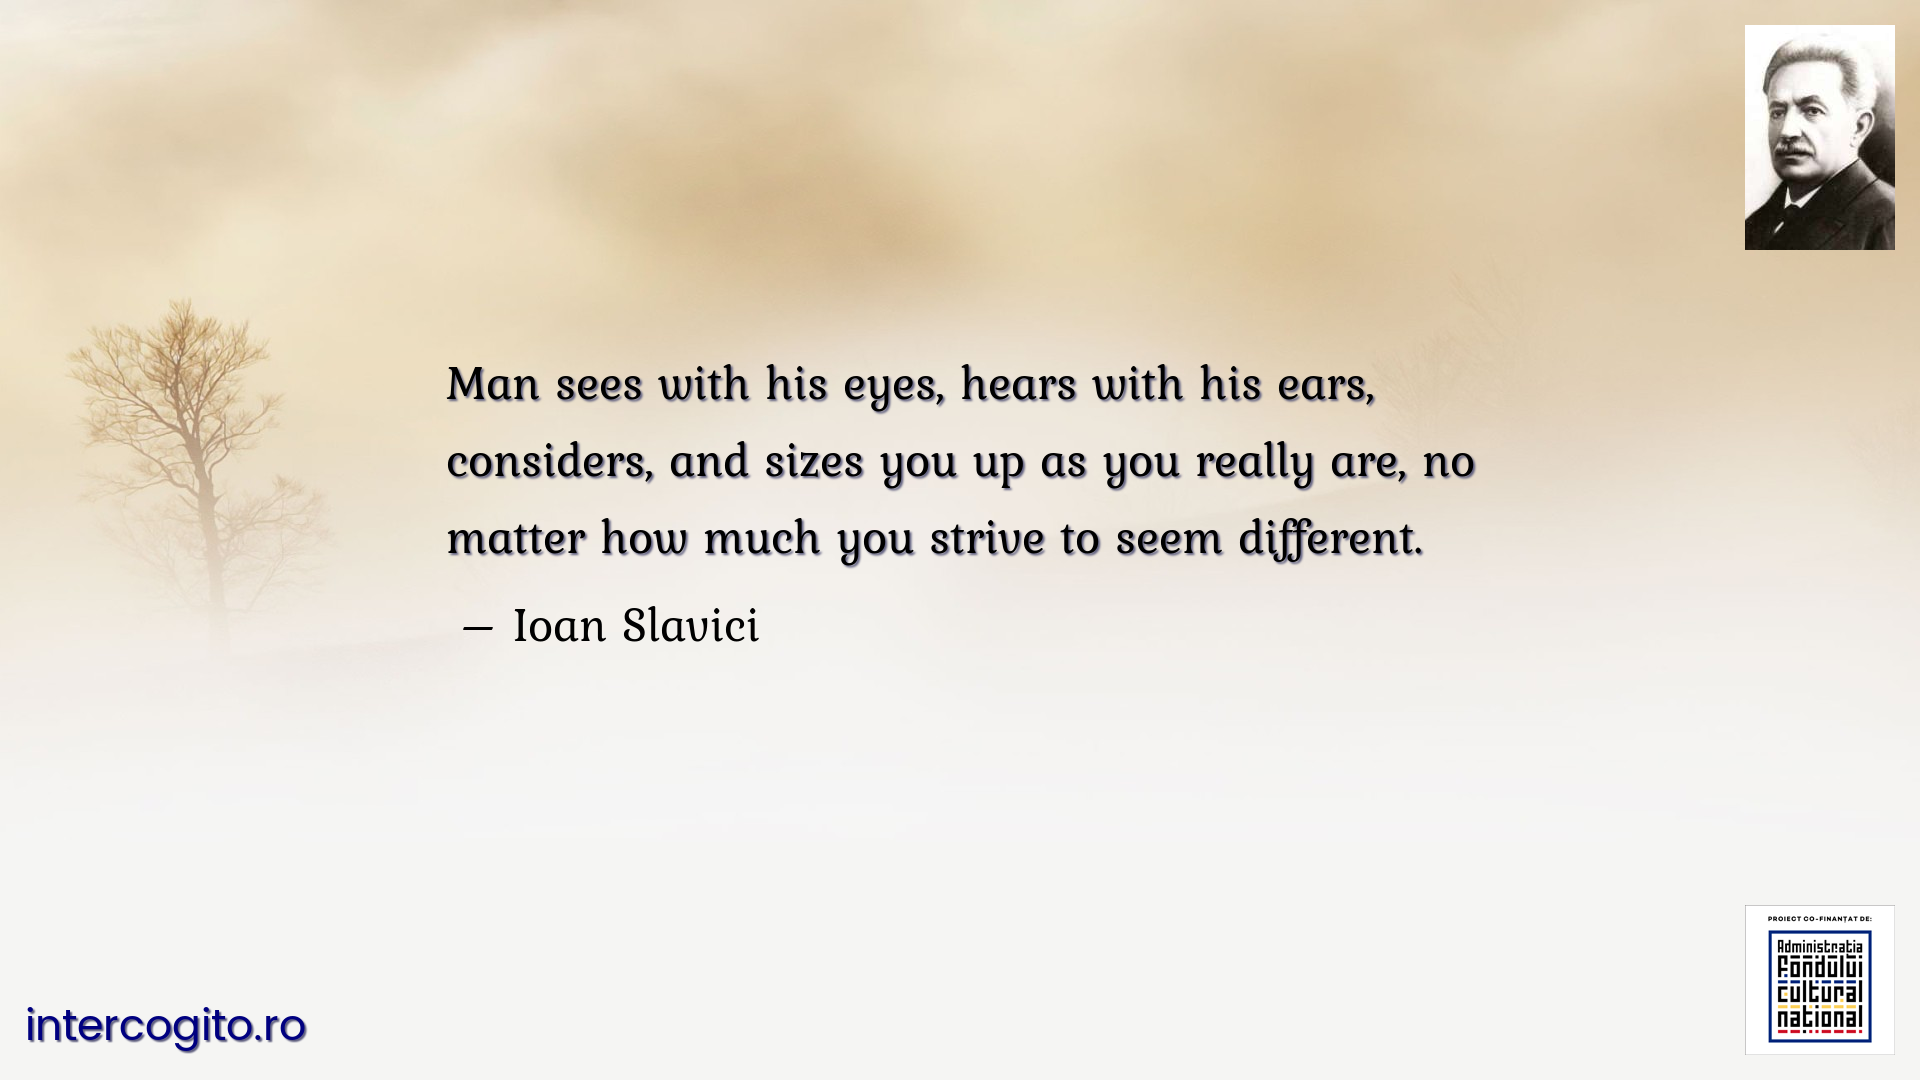 Man sees with his eyes, hears with his ears, considers, and sizes you up as you really are, no matter how much you strive to seem different.